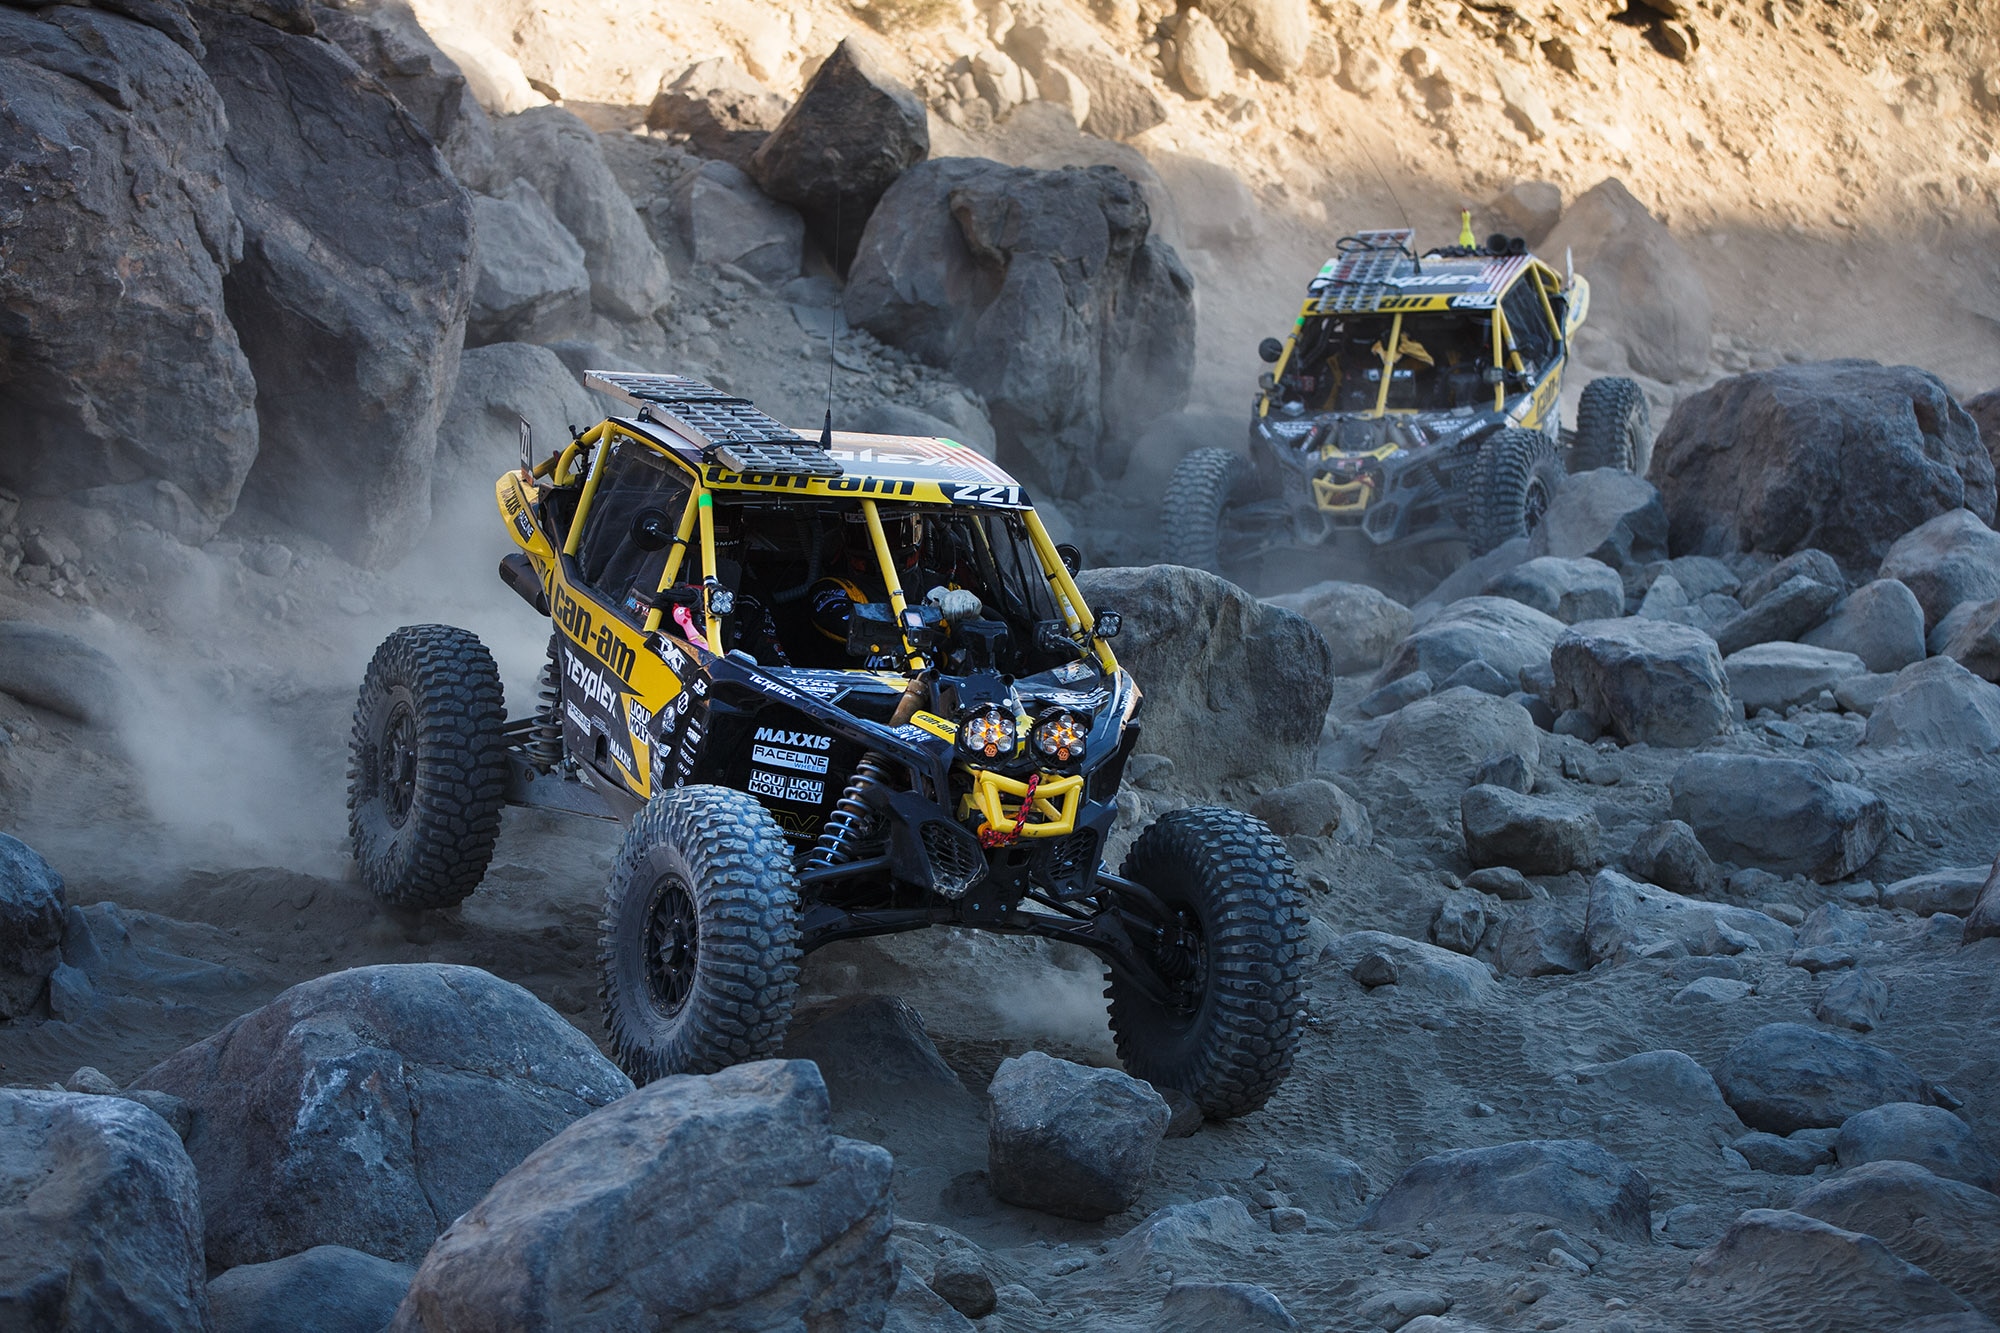 Racer at King of the hammers race